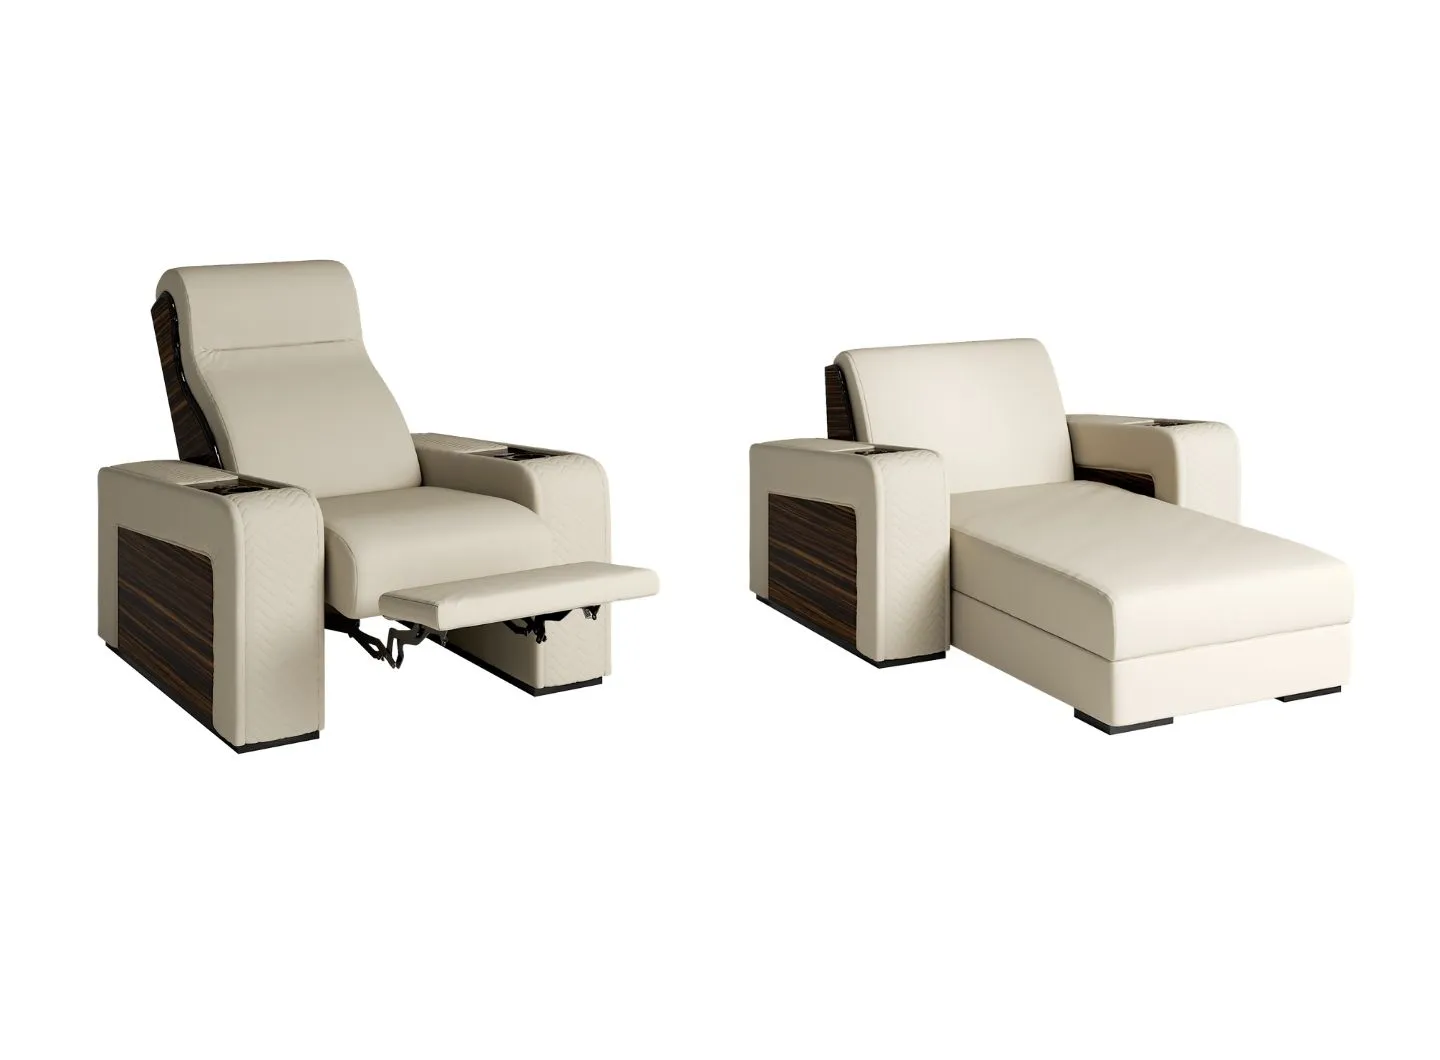 Reclining chair and chaise longue for home theater room